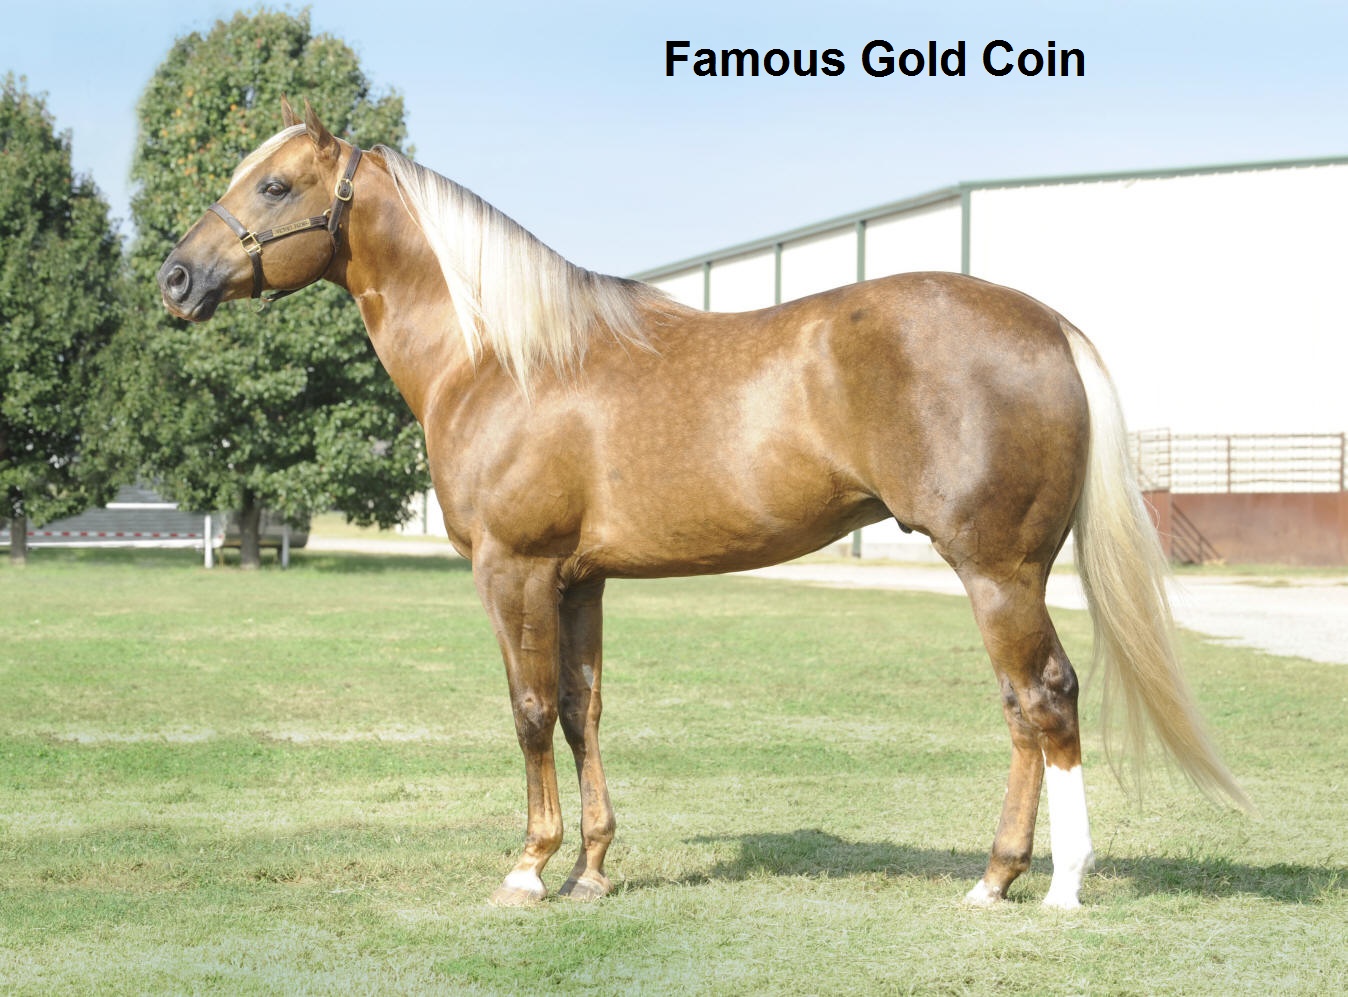 FAMOUS GOLD COIN